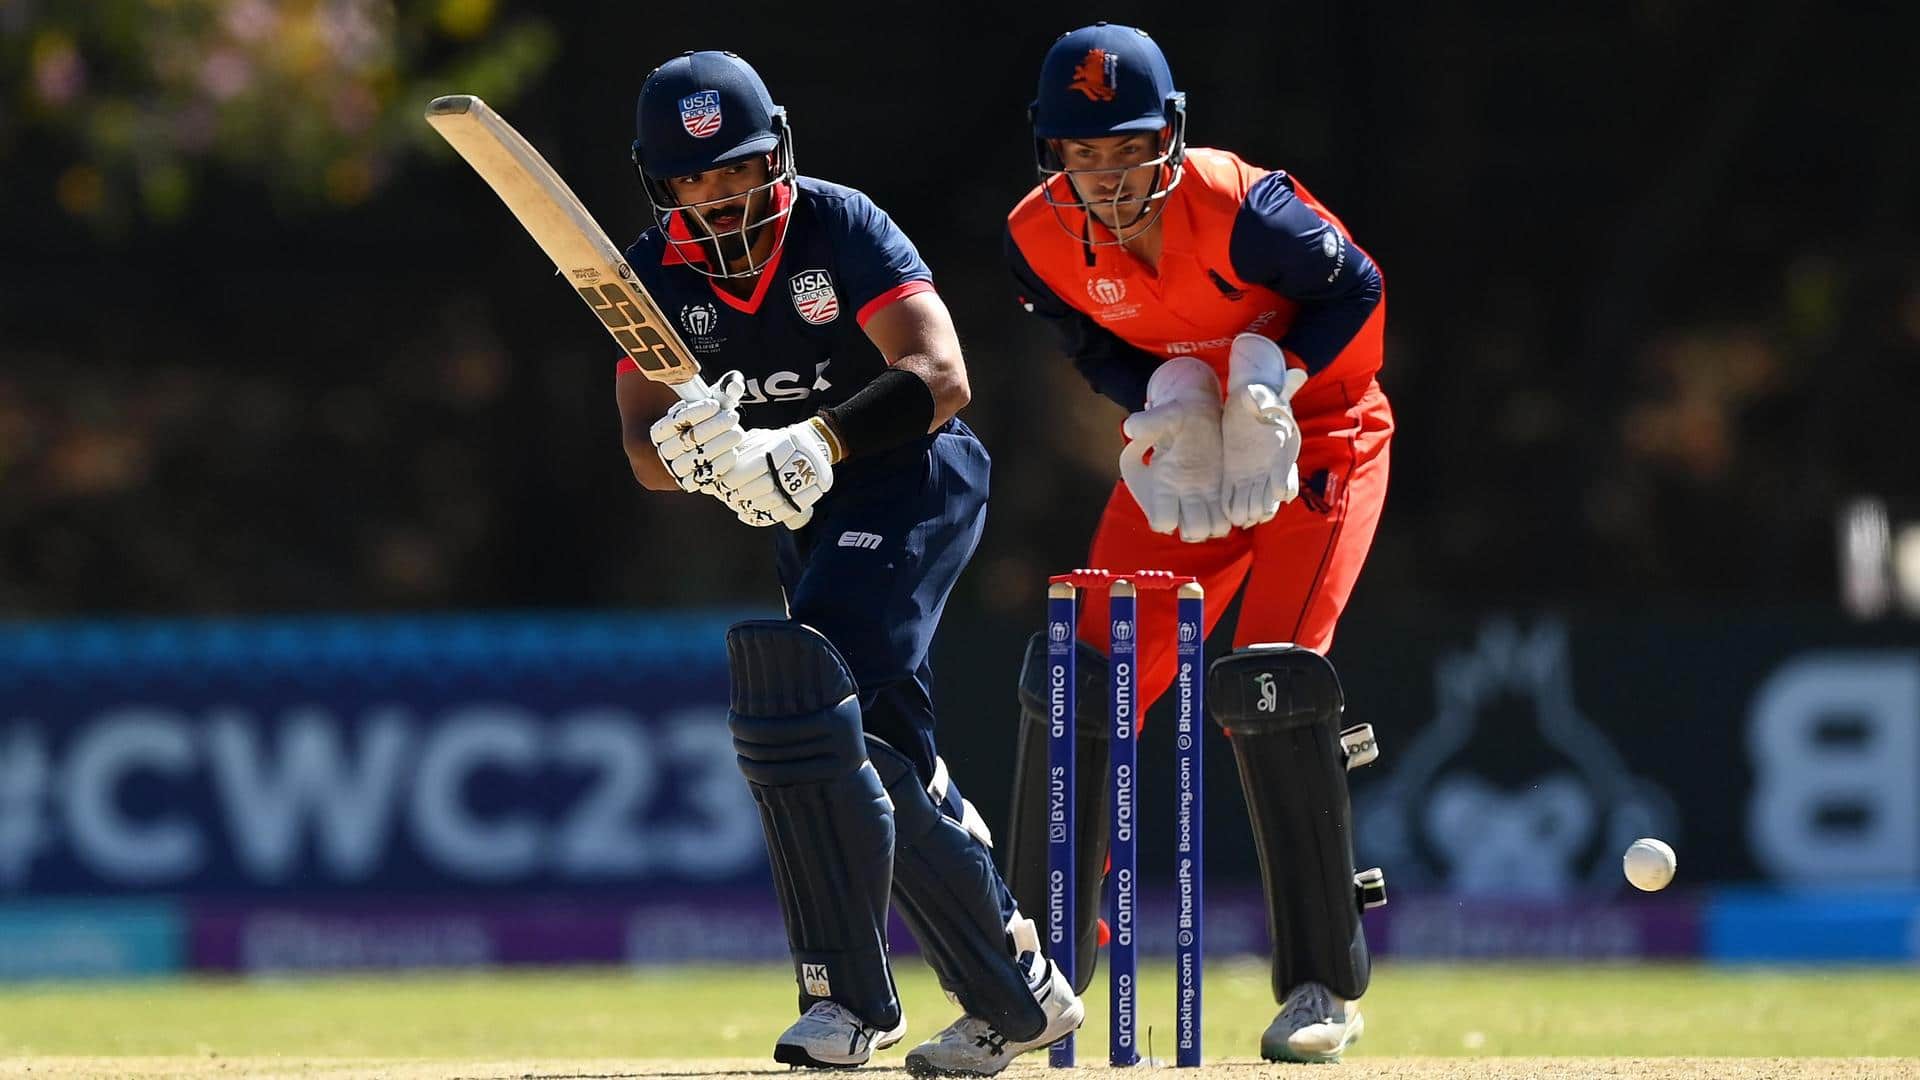 ICC Cricket World Cup Qualifiers, Netherlands beat USA: Key stats